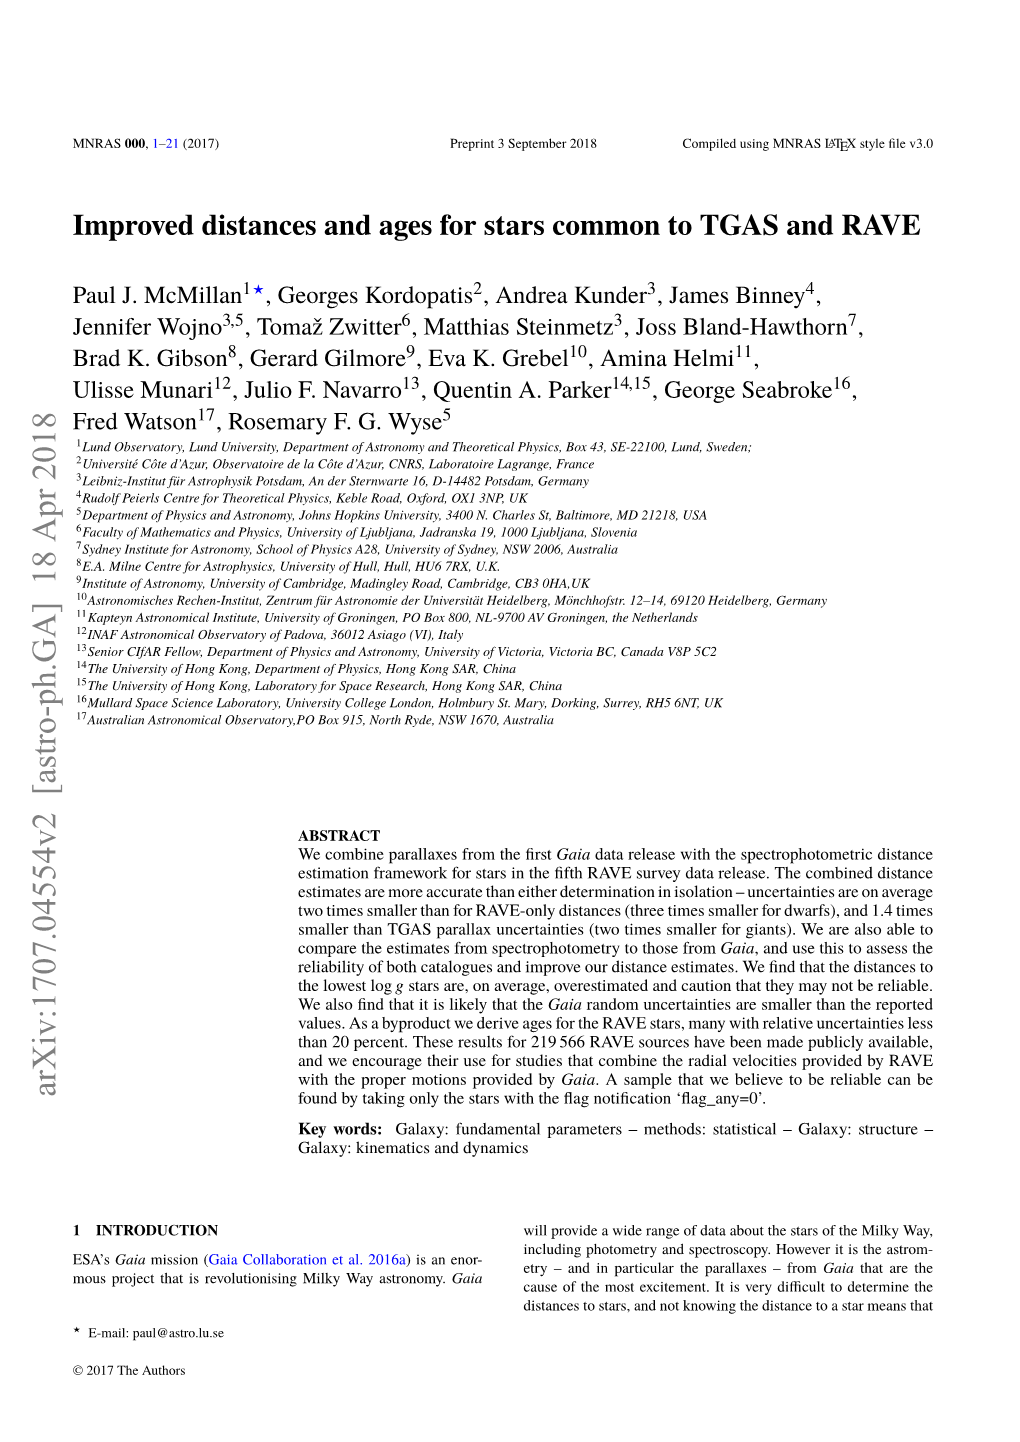 Improved Distances and Ages for Stars Common to TGAS and RAVE